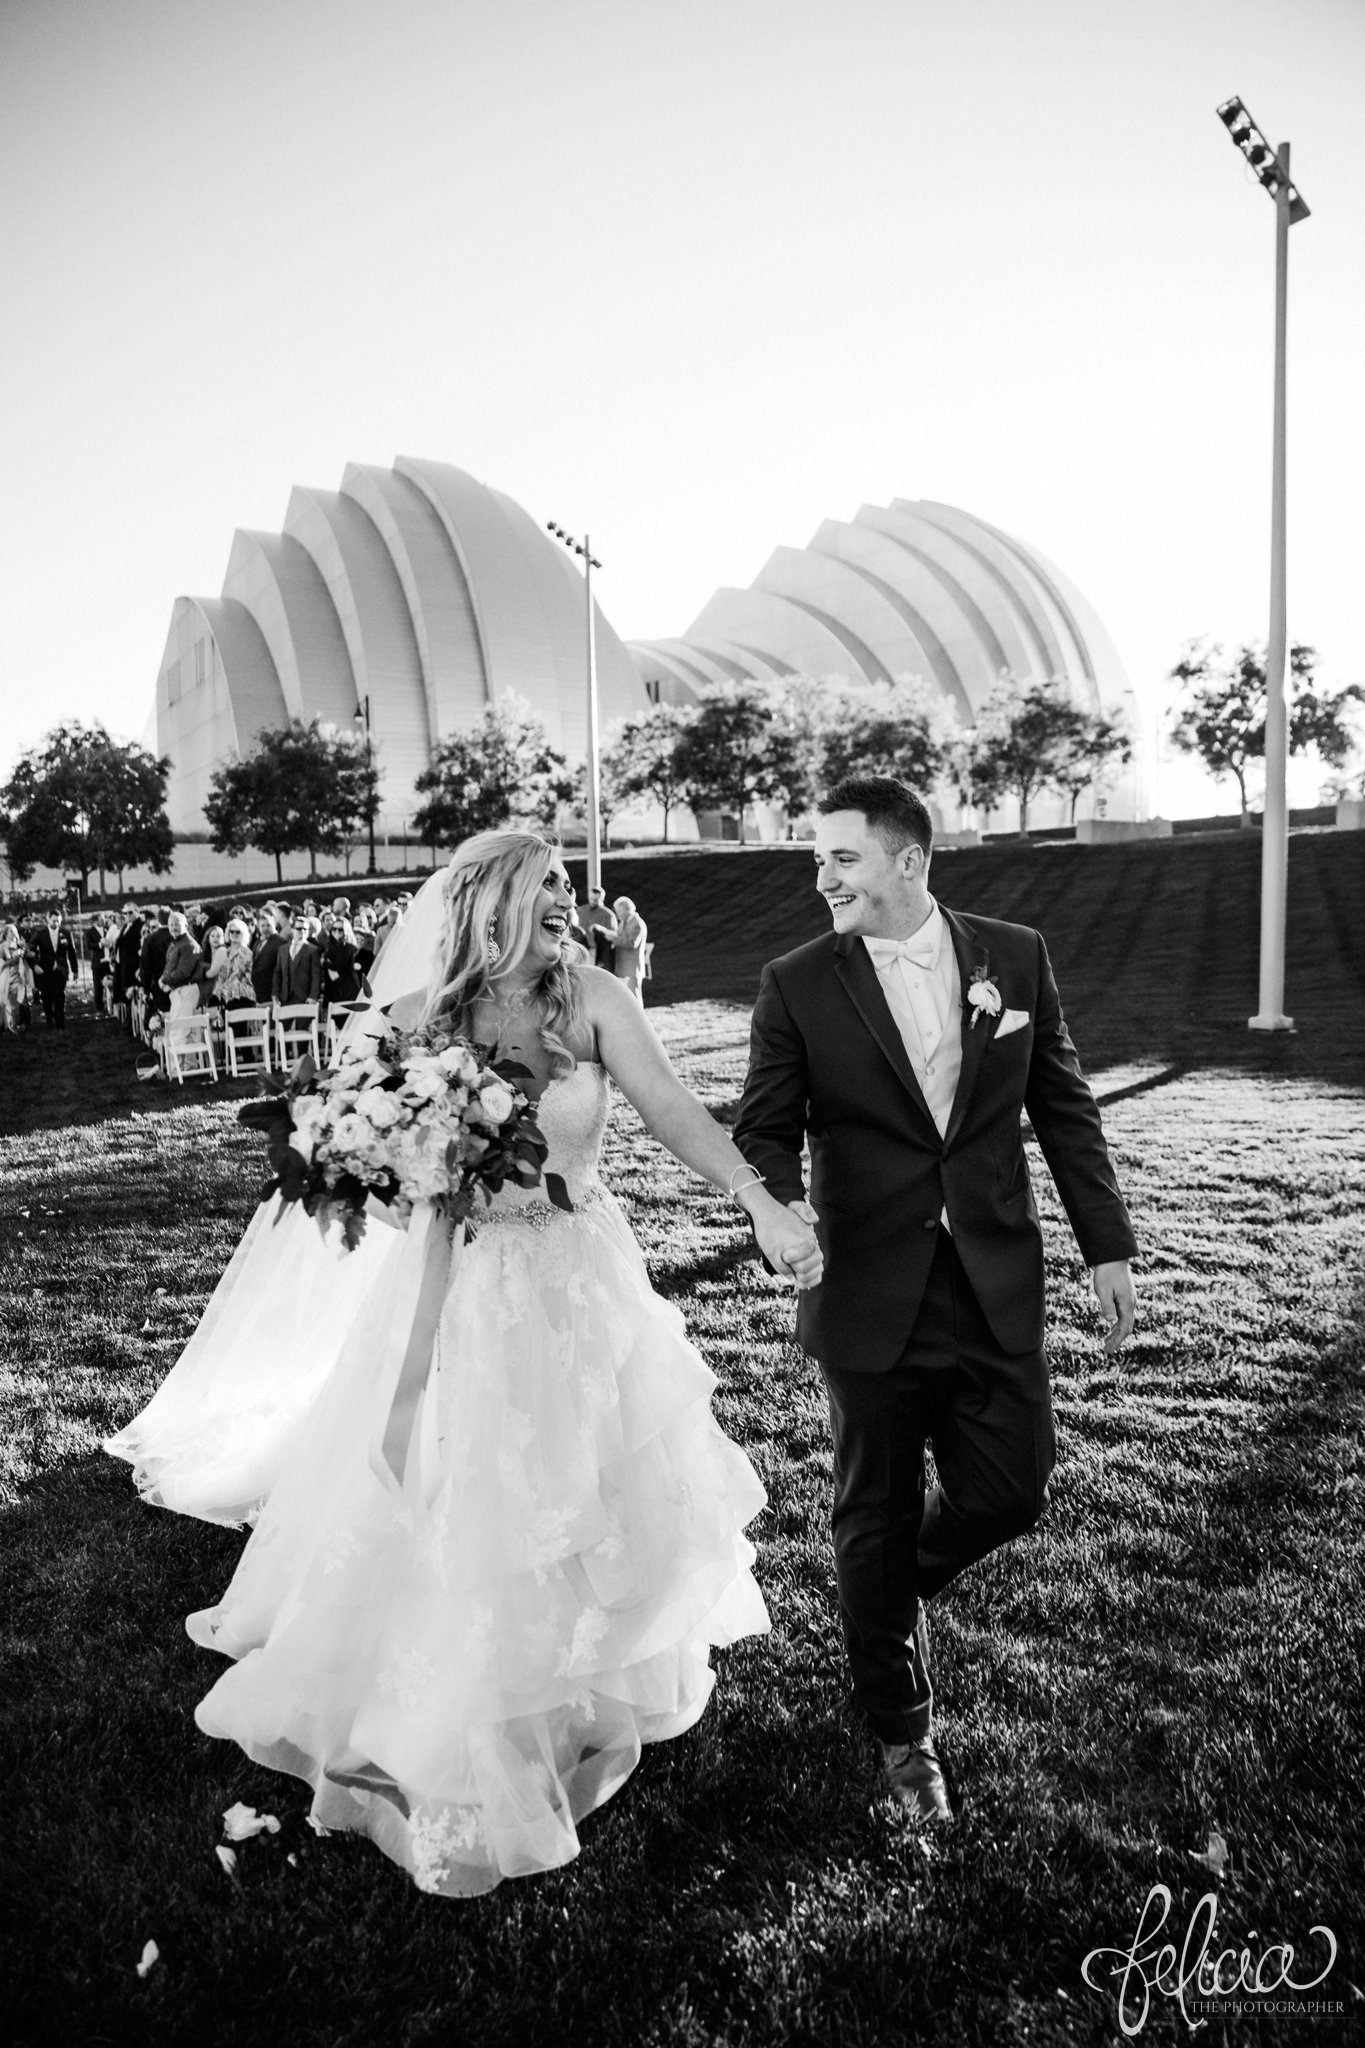 images by feliciathephotographer.com | wedding photographer | downtown kansas city | outdoor ceremony | kauffman center | the grand ballroom kc convention center | black and white | walking back down the aisle | married | bride and groom | romantic | joy | 